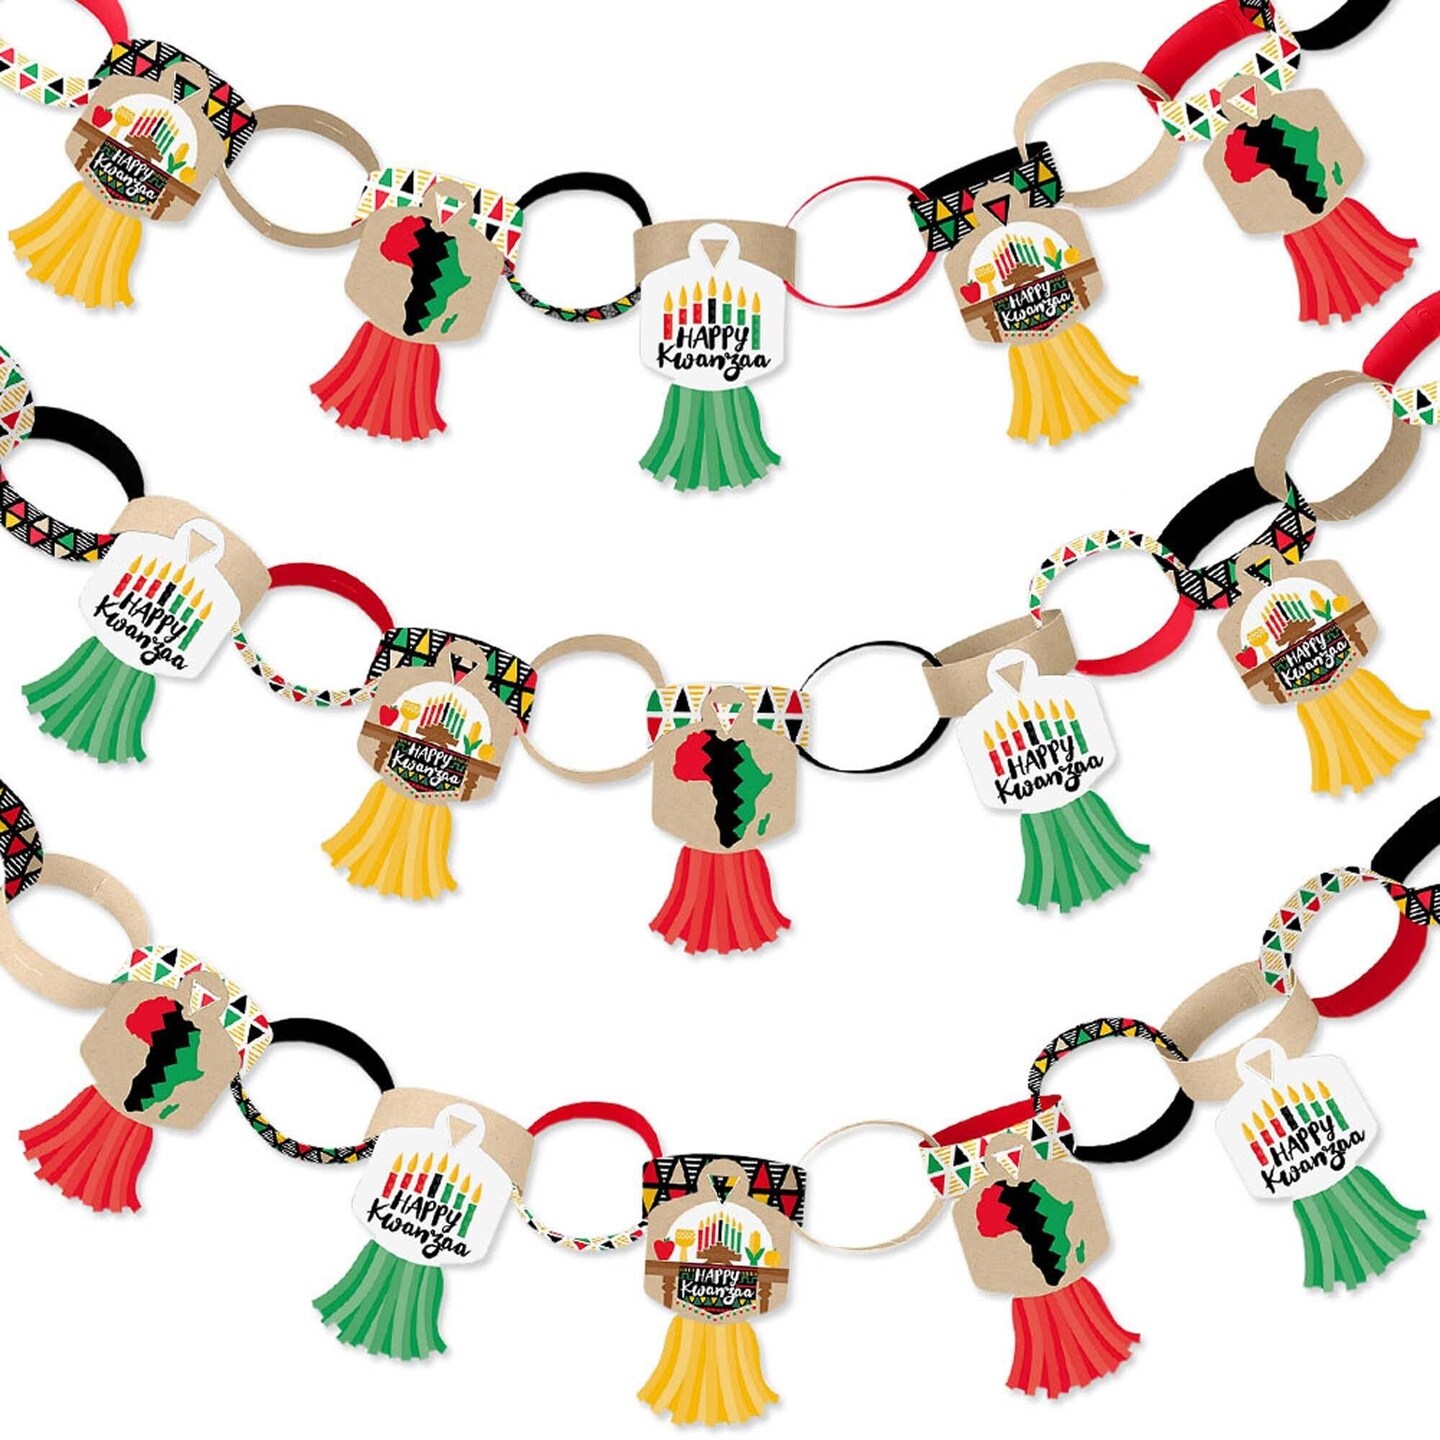 Big Dot of Happiness Happy Kwanzaa - 90 Chain Links and 30 Paper Tassels Decoration Kit - Party Paper Chains Garland - 21 feet